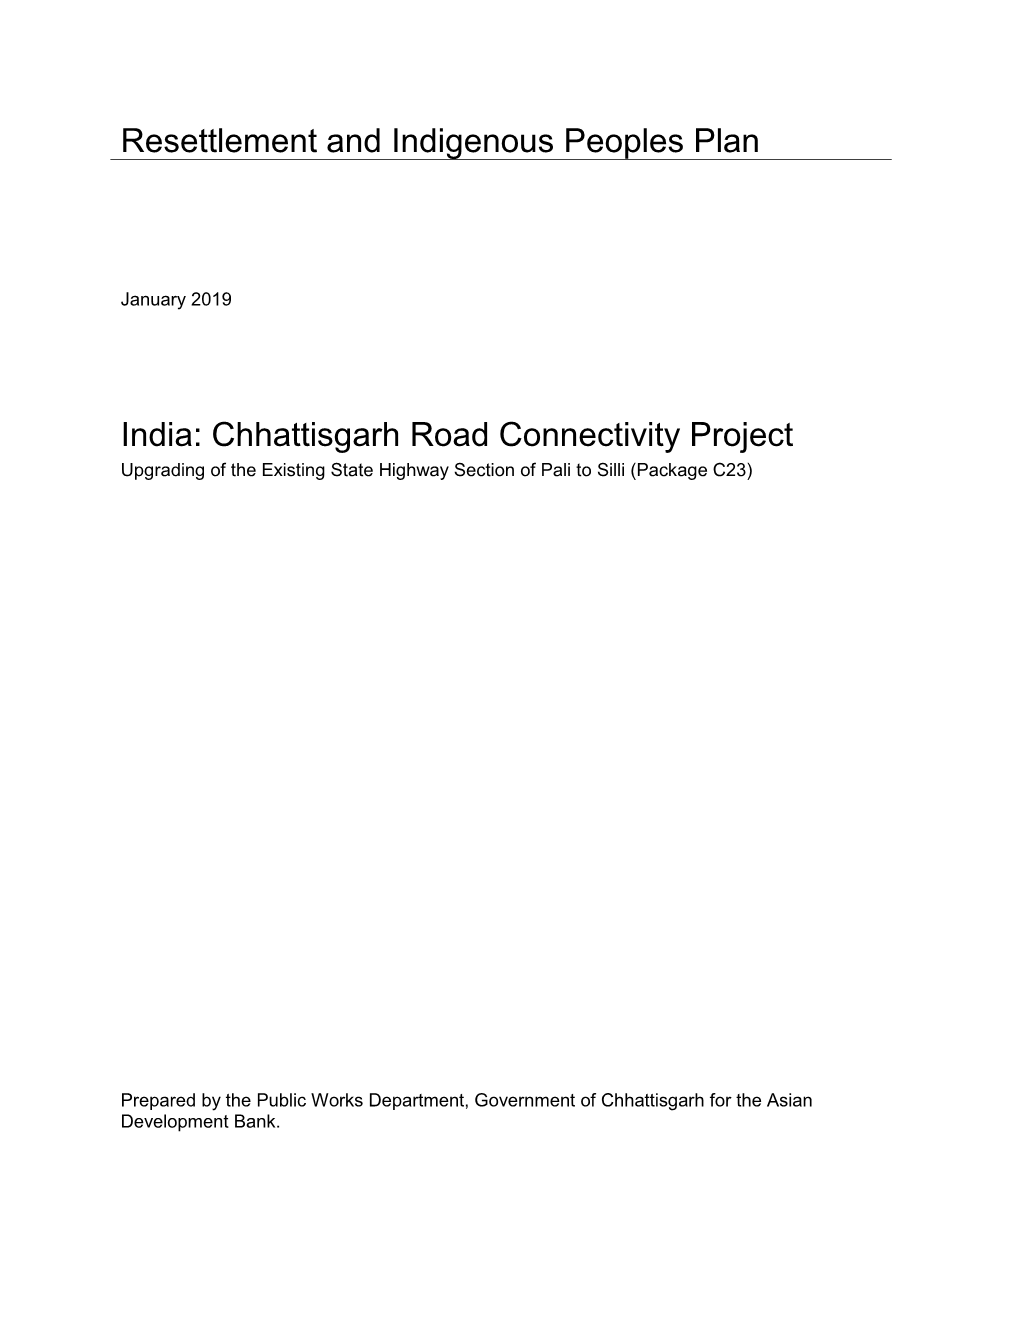 Resettlement and Indigenous Peoples Plan India: Chhattisgarh Road Connectivity Project